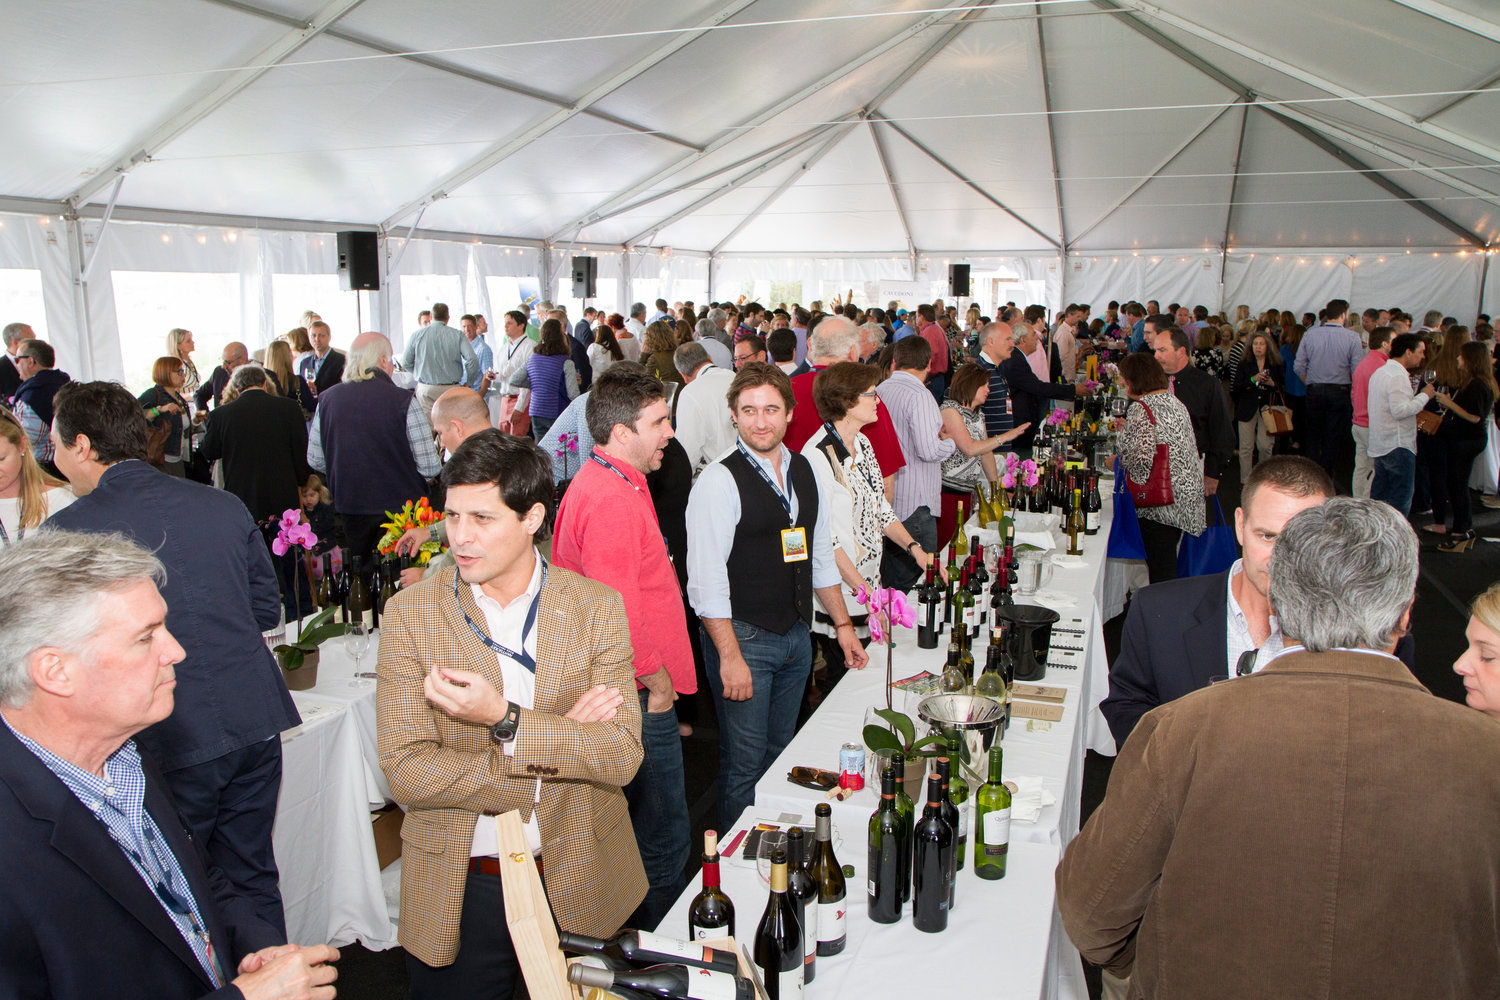 A past grand tasting at the Nantucket Wine and Food Festival.